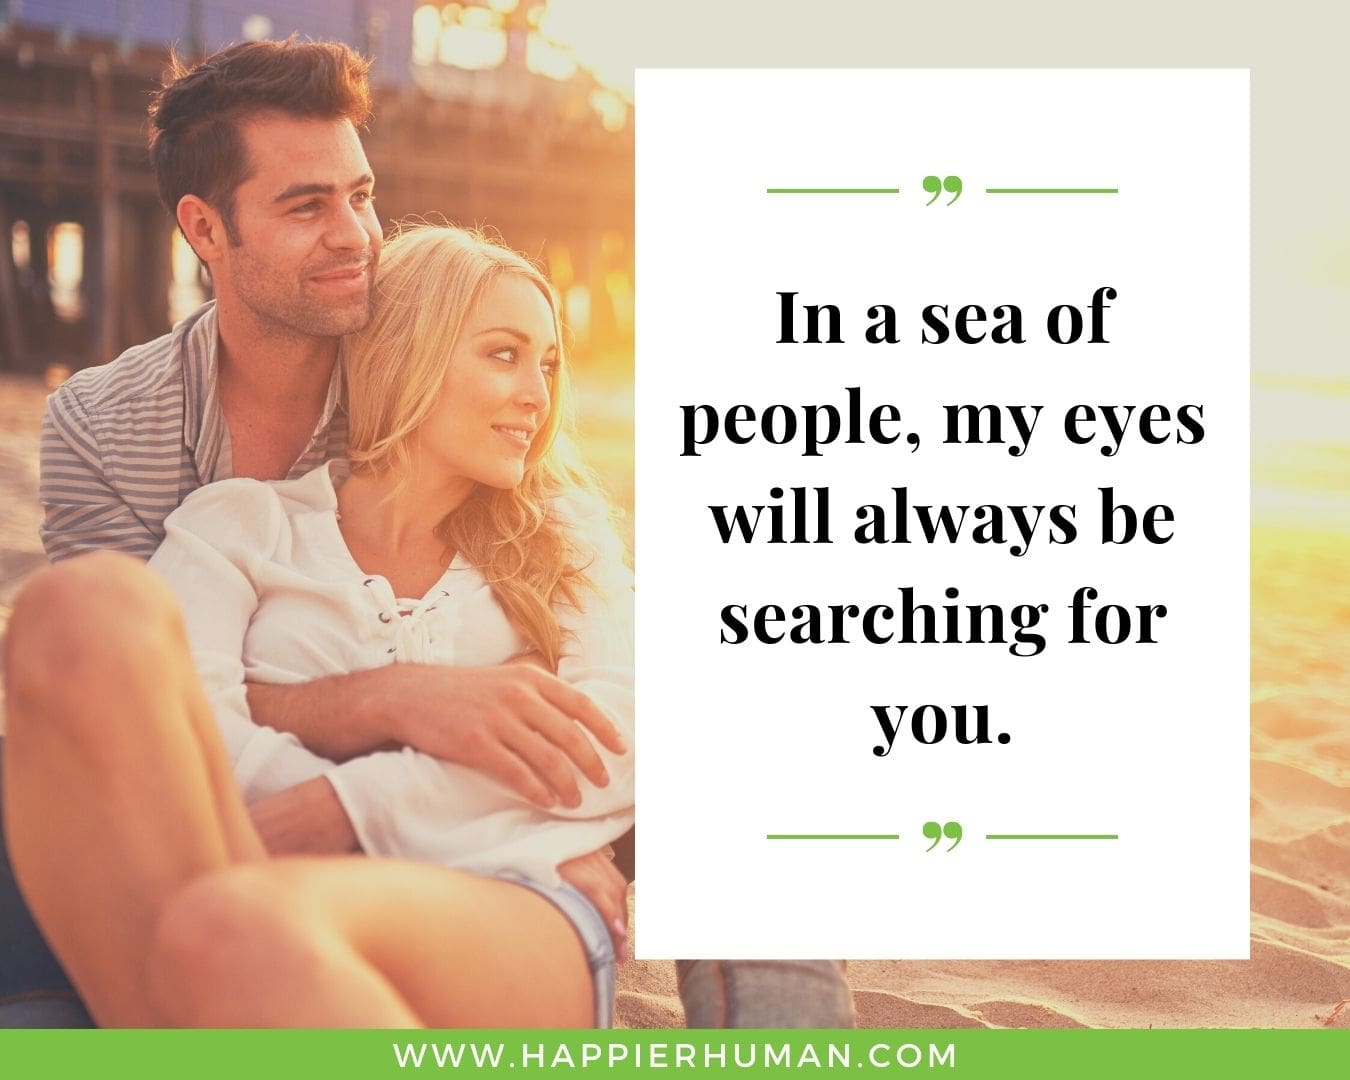 Short, Deep Love Quotes for Her - “In a sea of people, my eyes will always be searching for you.”